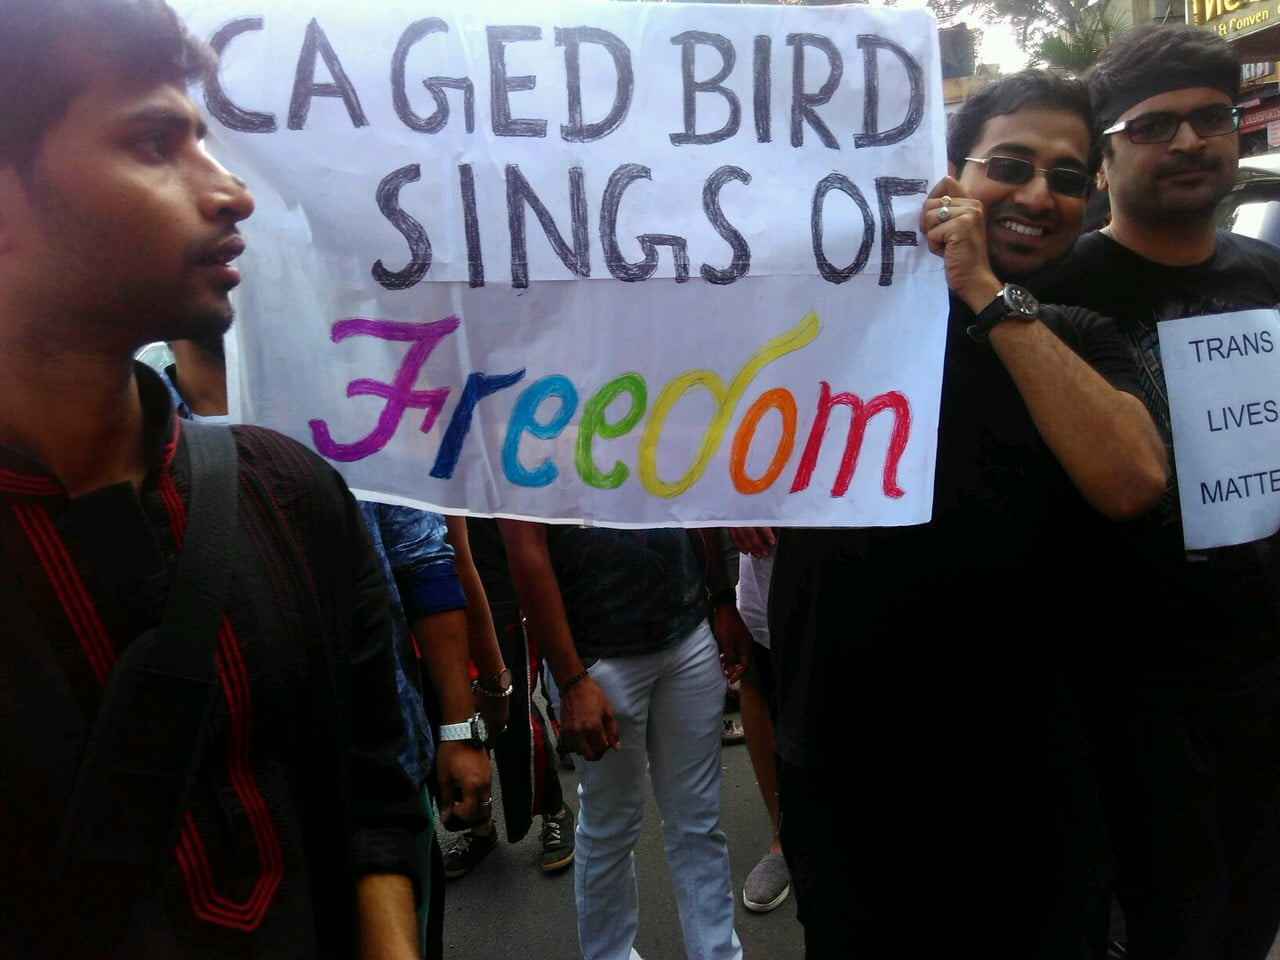 "Caged Birds sings of Freedom" 